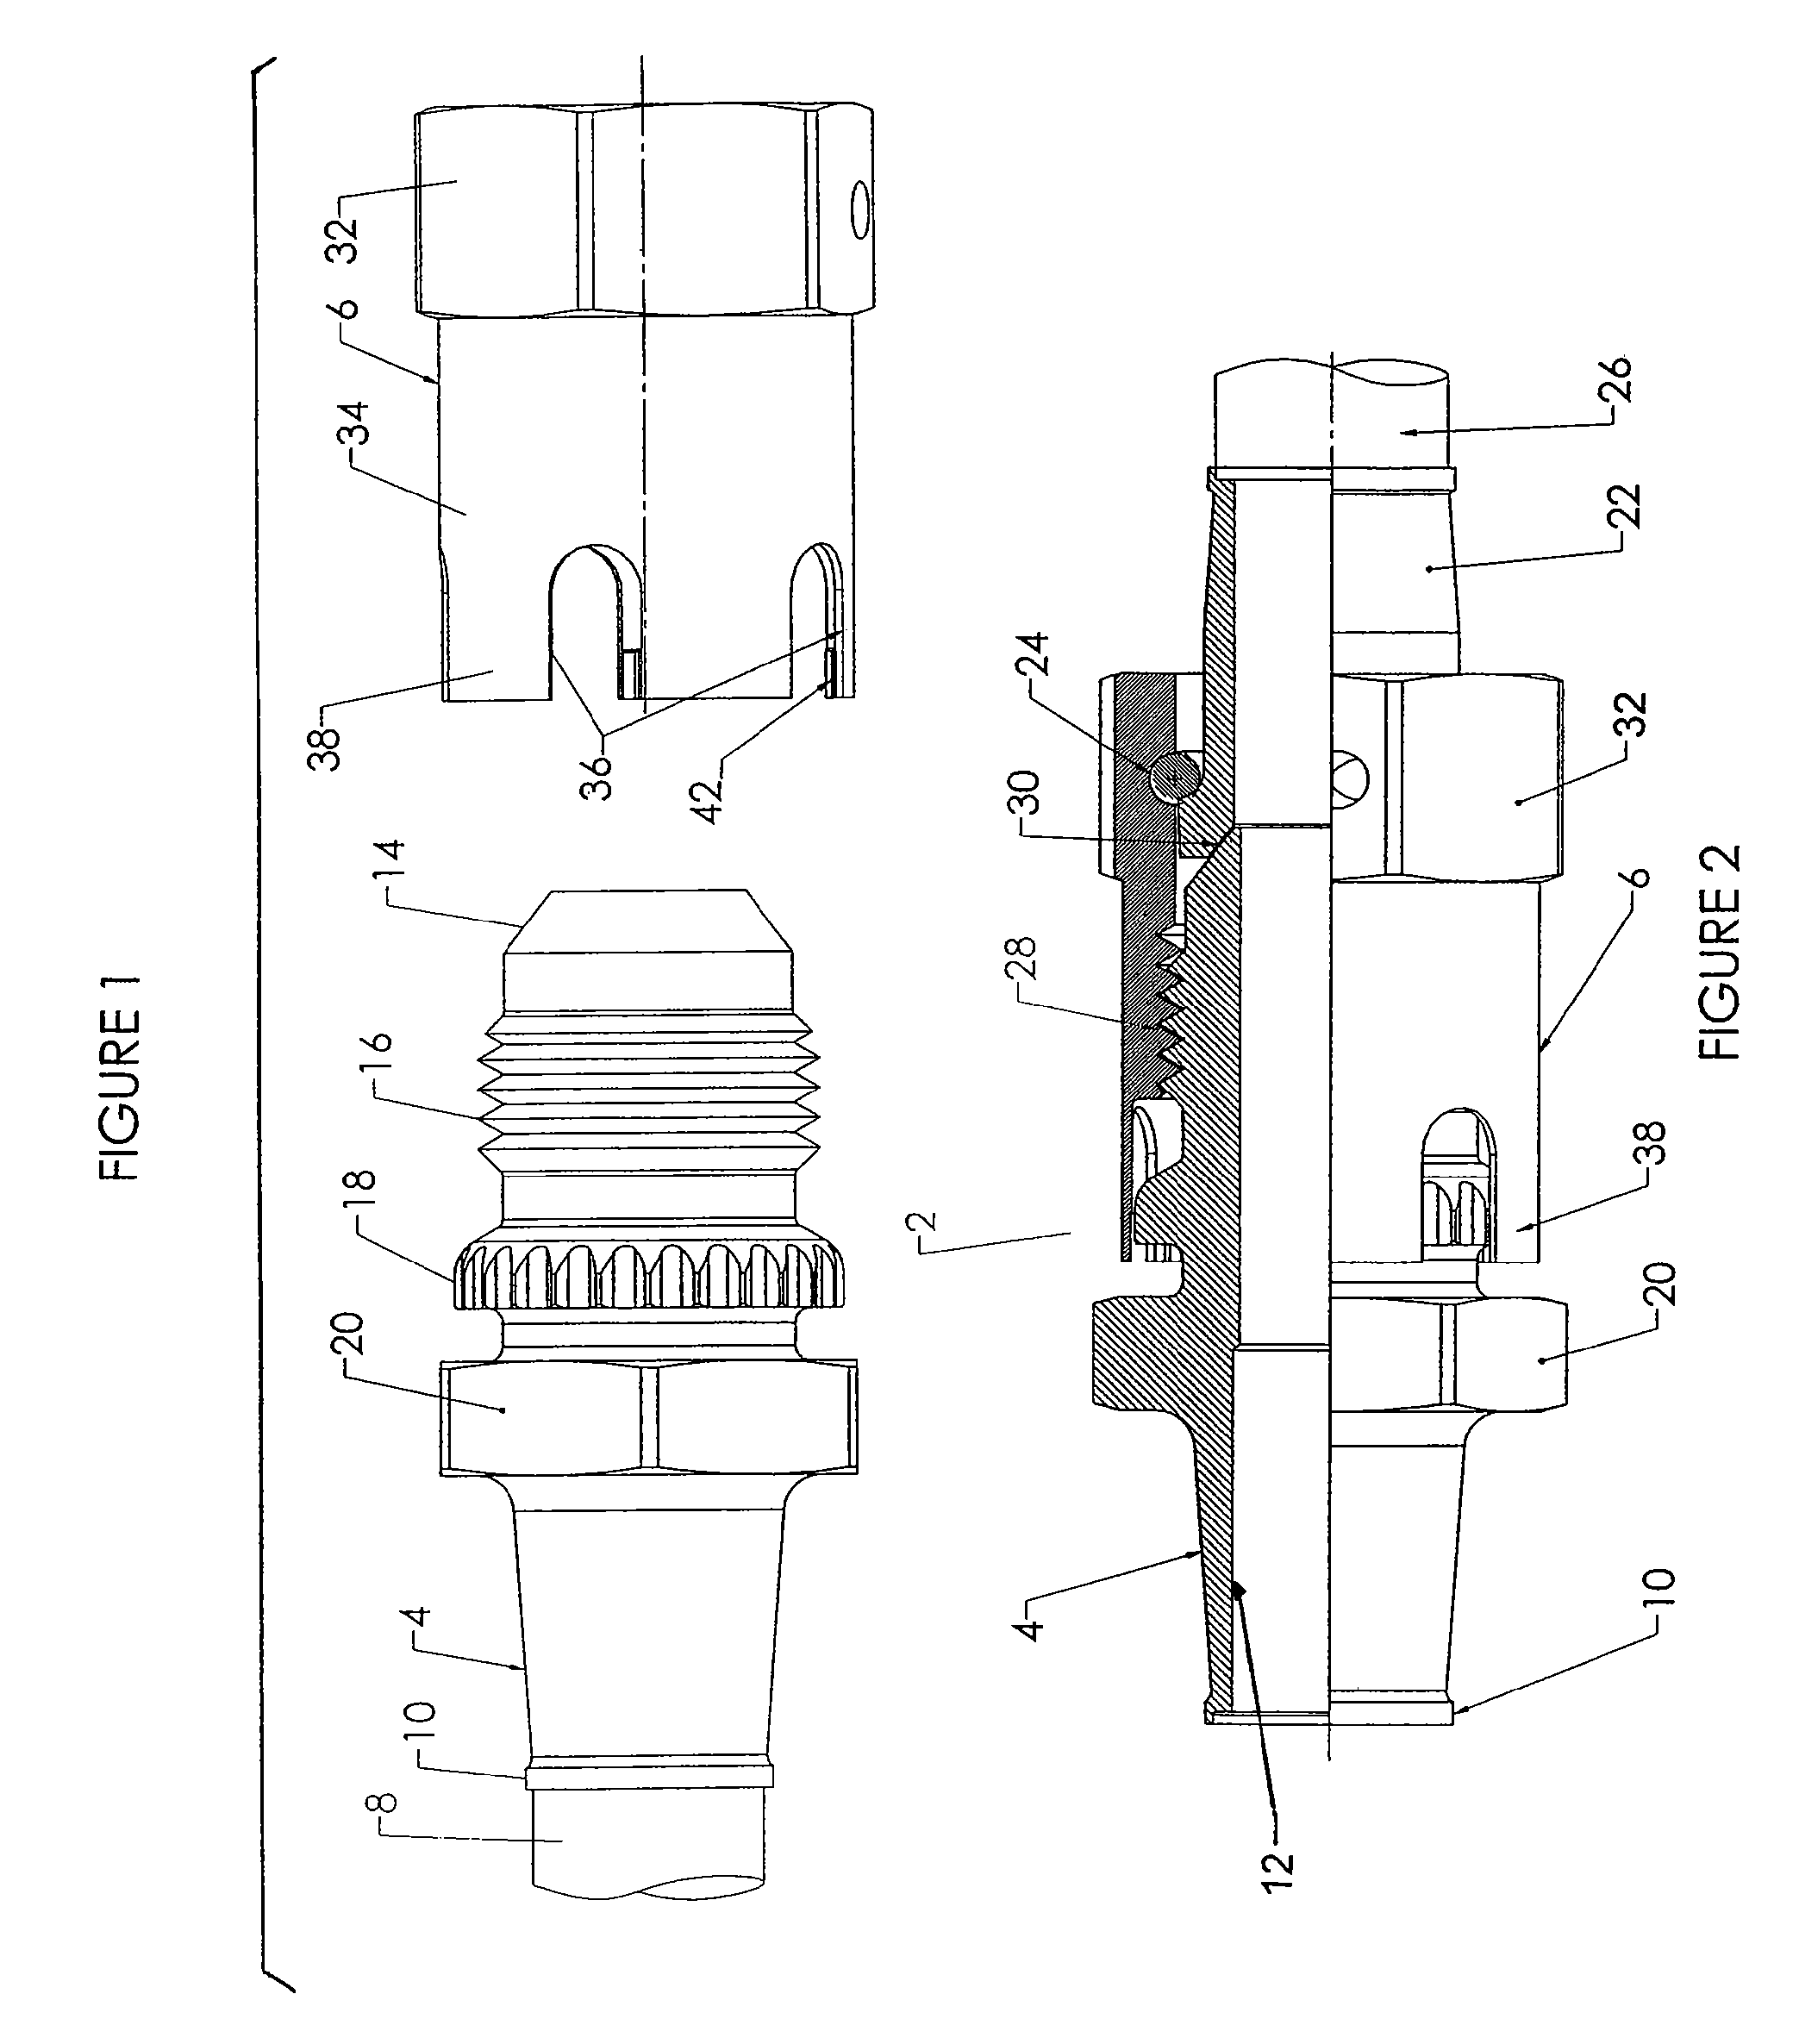 Fluid coupling assembly with integral retention mechanism